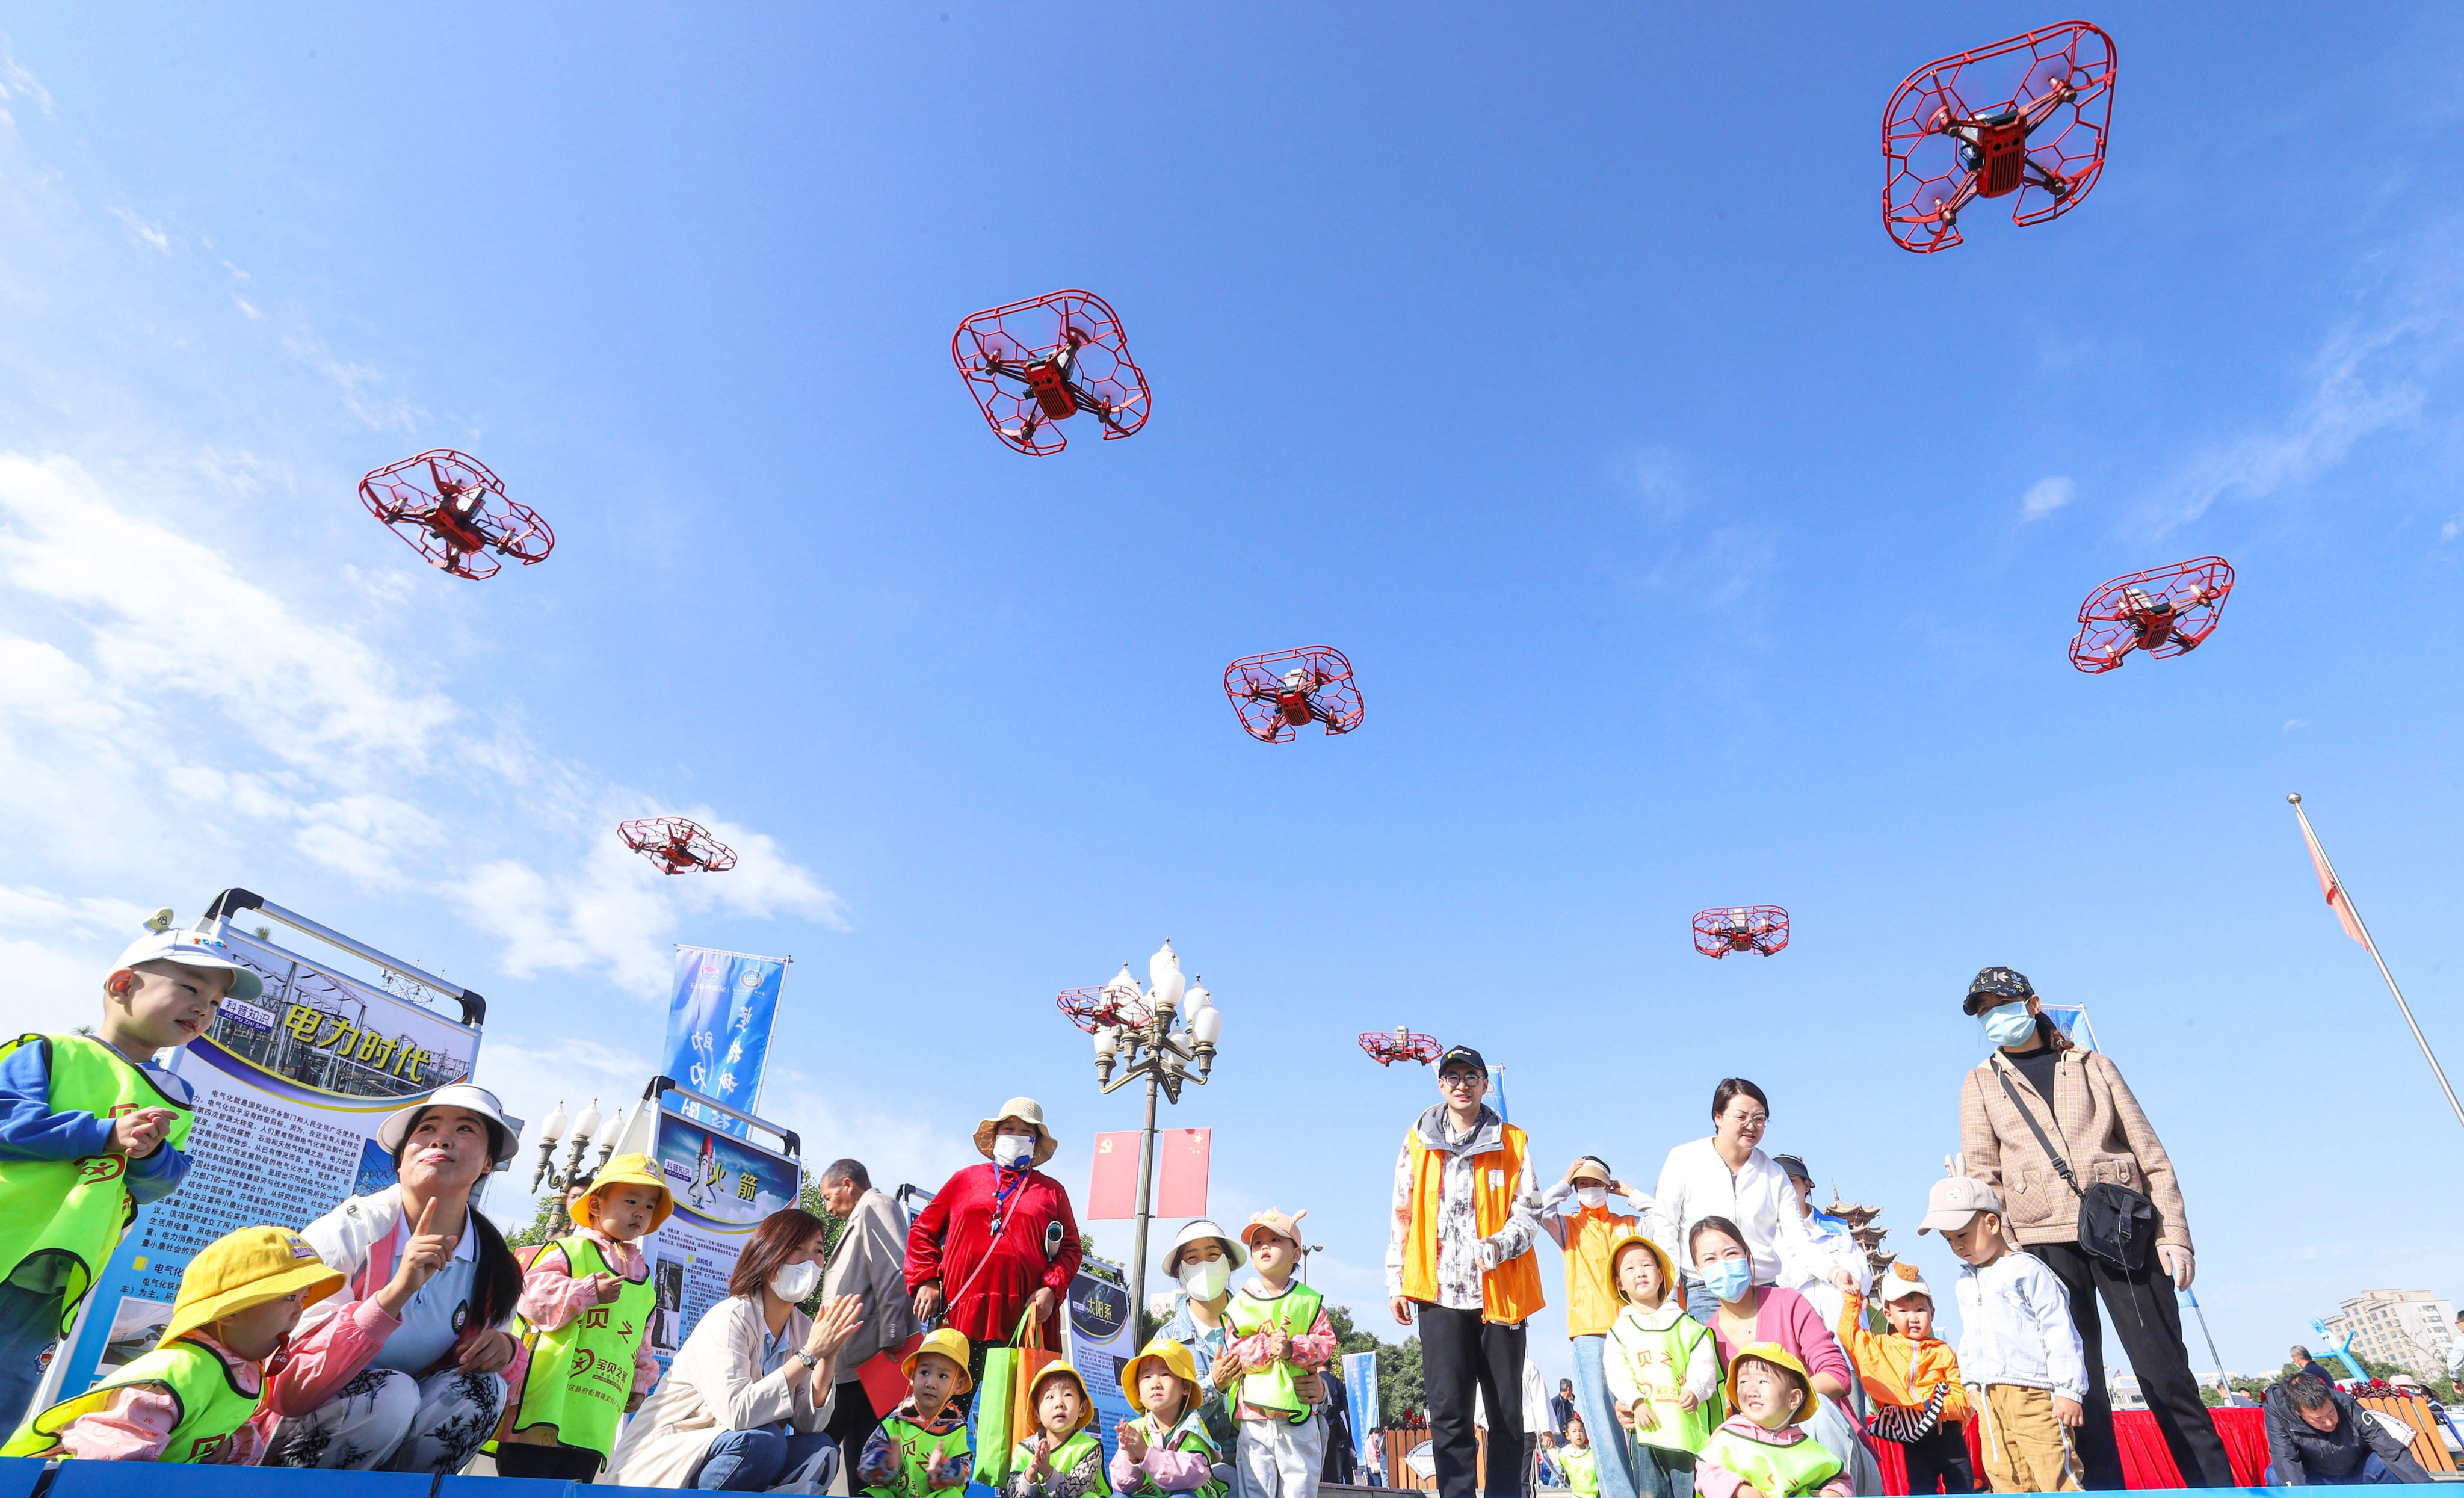 Drone enthusiasts in China say operators modify their devices mainly for recreational purposes but Beijing approaches breaches from a national security perspective. Photo: CFOTO/Future Publishing via Getty Images